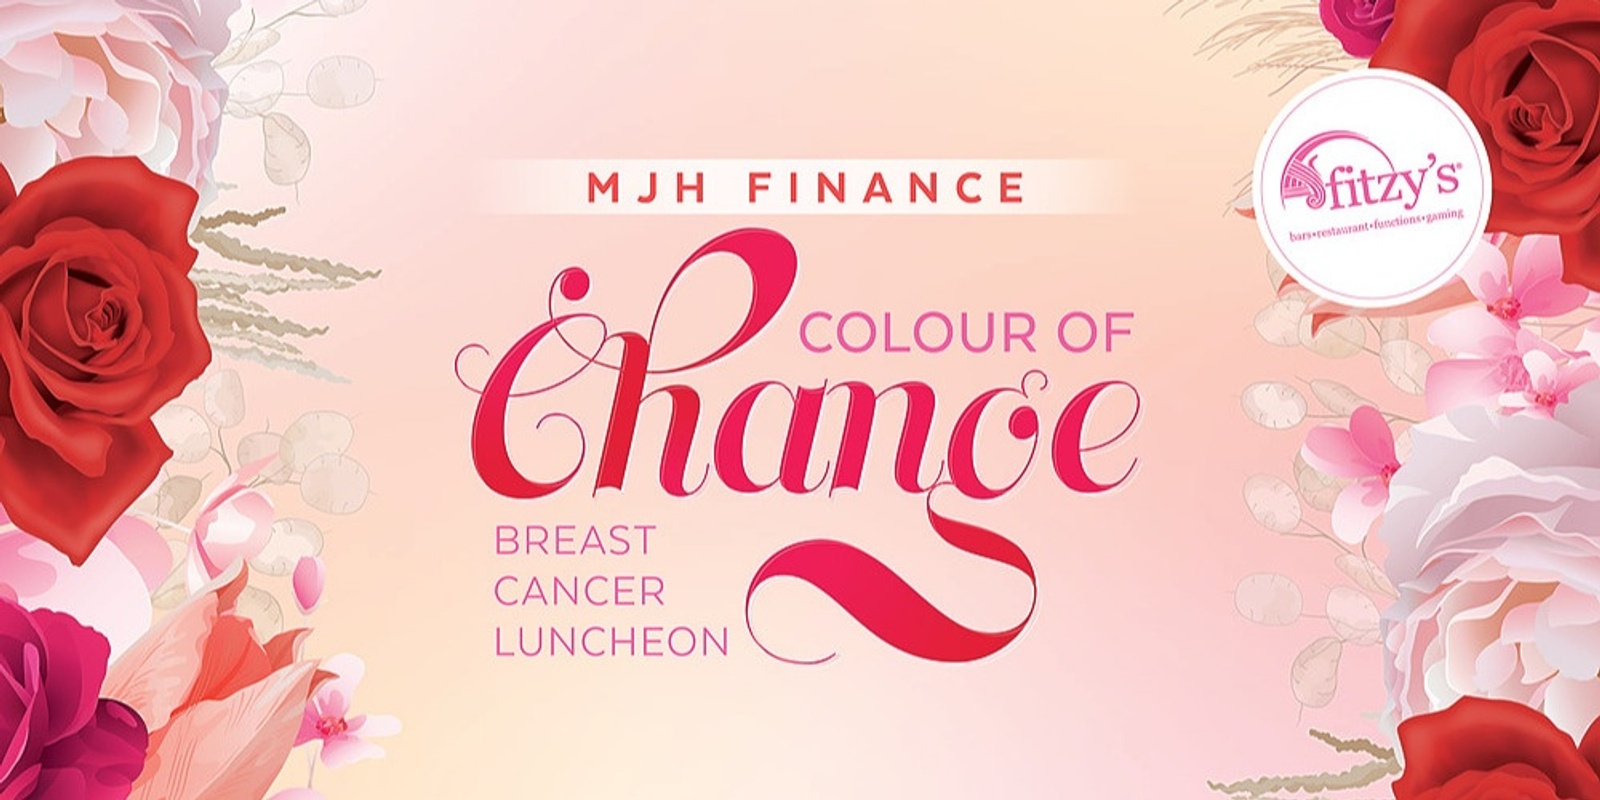 Banner image for MJH Finance Colour of Change Breast Cancer Luncheon